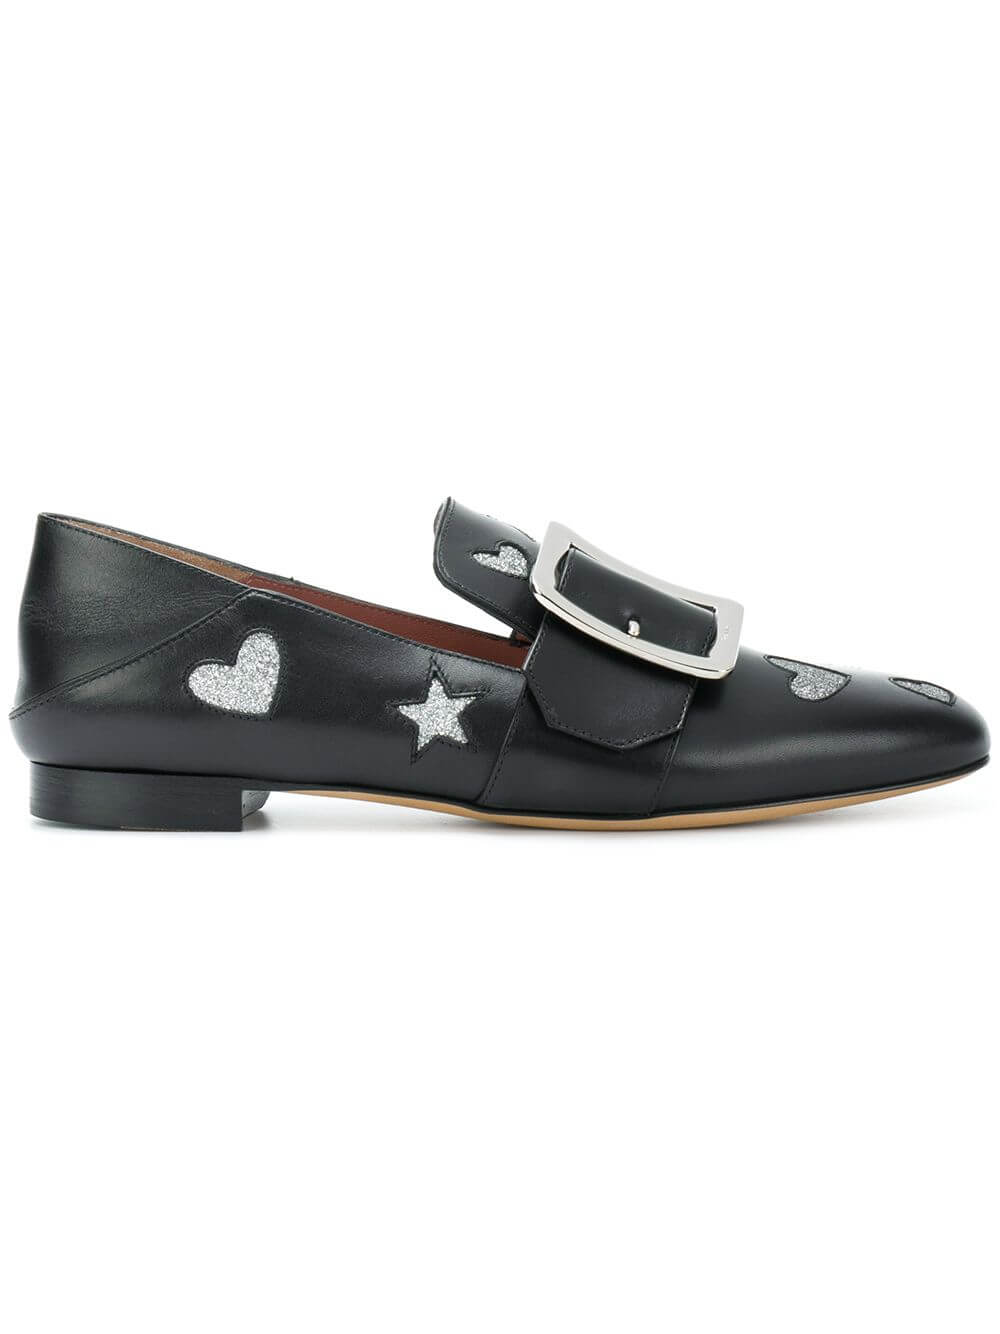 NEW Bally Janelle Hearts Women's 6221029 Black Leather Loafers US 7.5 MSRP $675